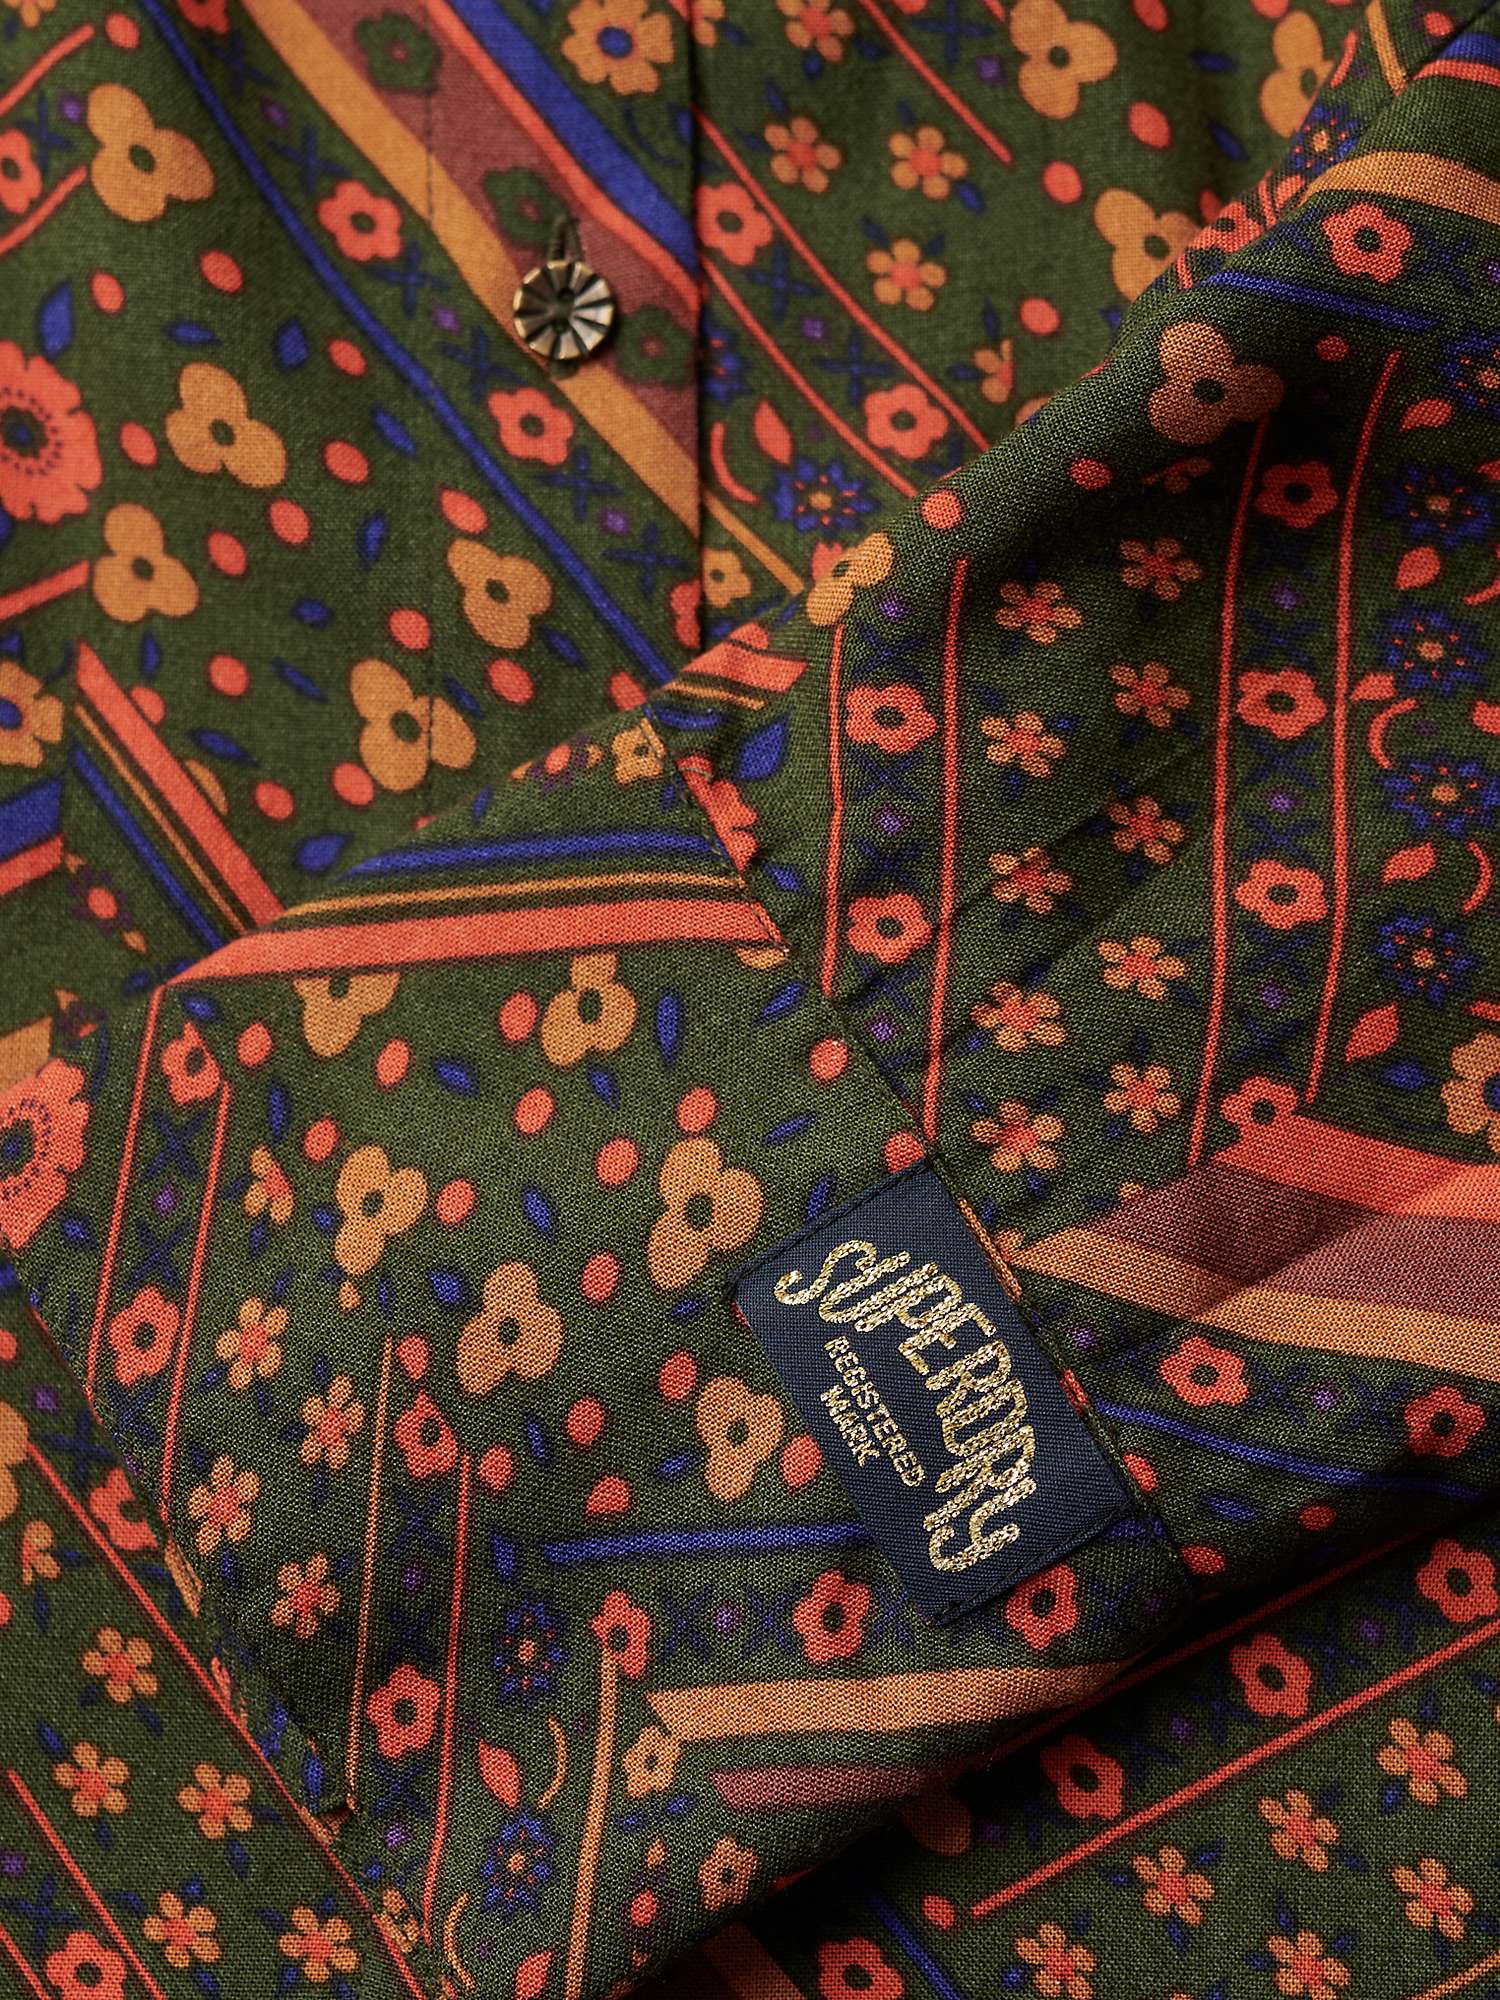 Buy Superdry Abstract Chevron 70s Print Slim Fit Shirt, Multi Online at johnlewis.com